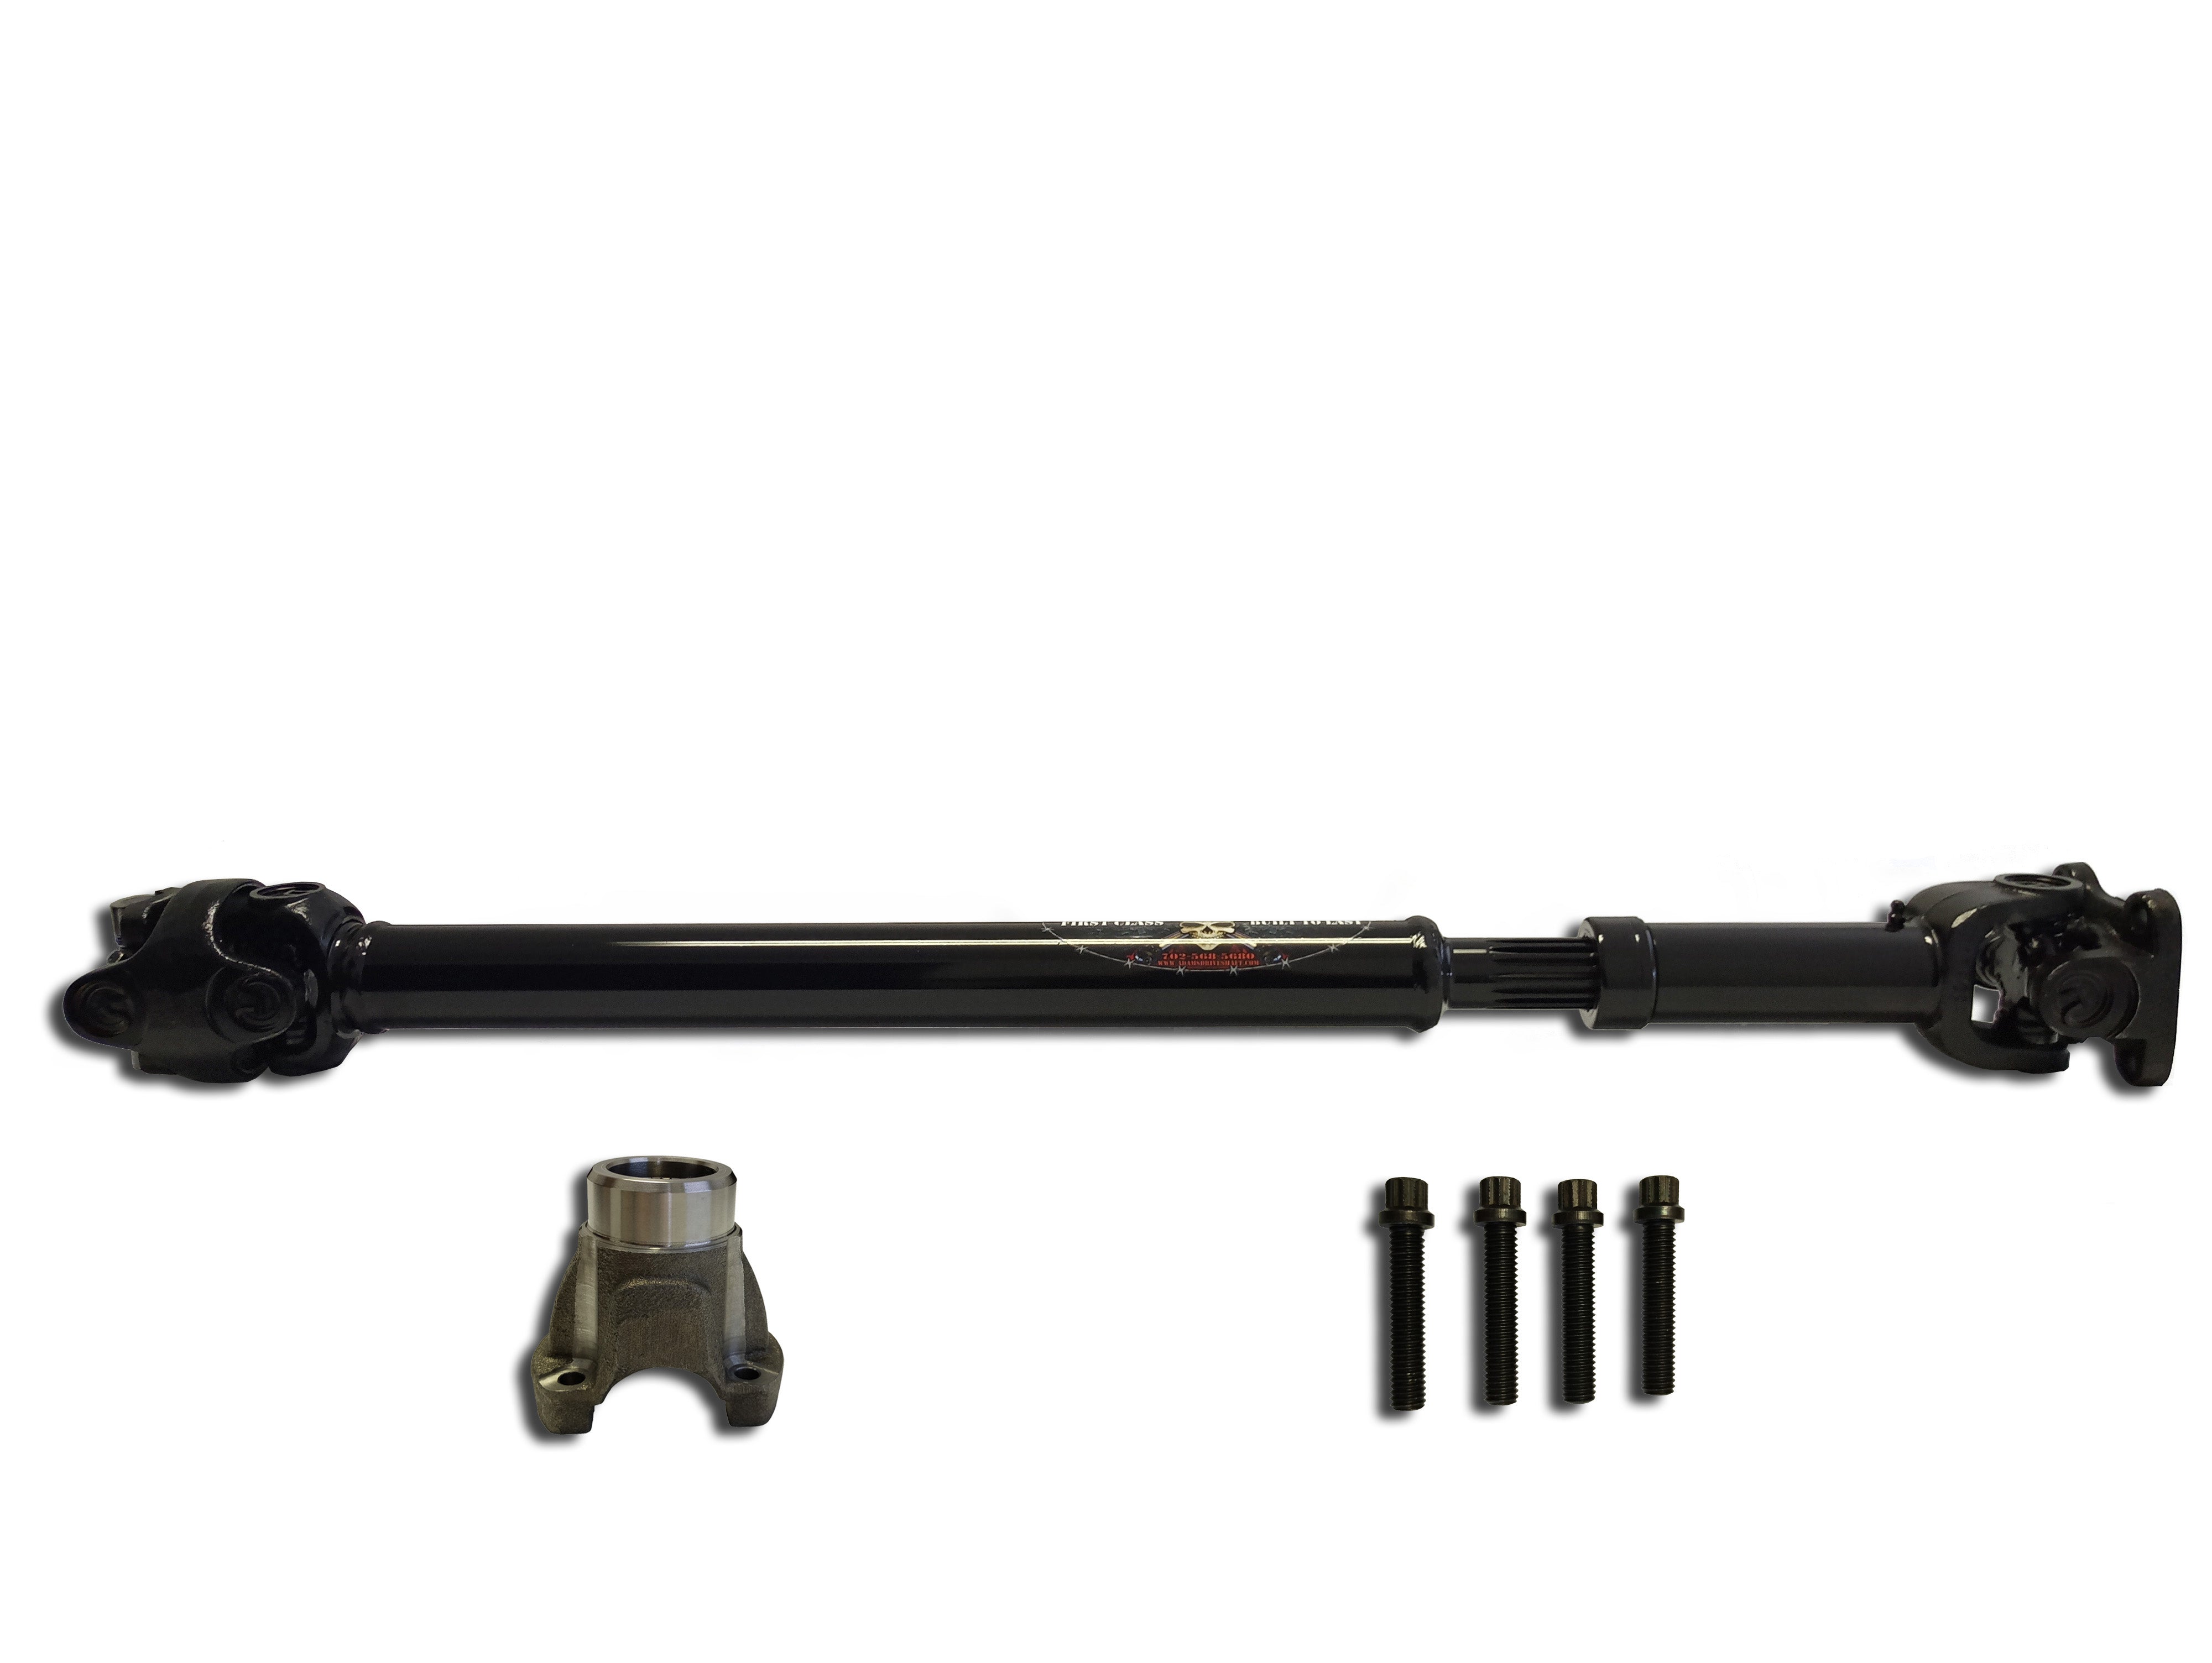 Adams Driveshaft JK Front 1310 CV Driveshaft with Spicer greasable u-joints [HEAVY DUTY SERIES] - 0